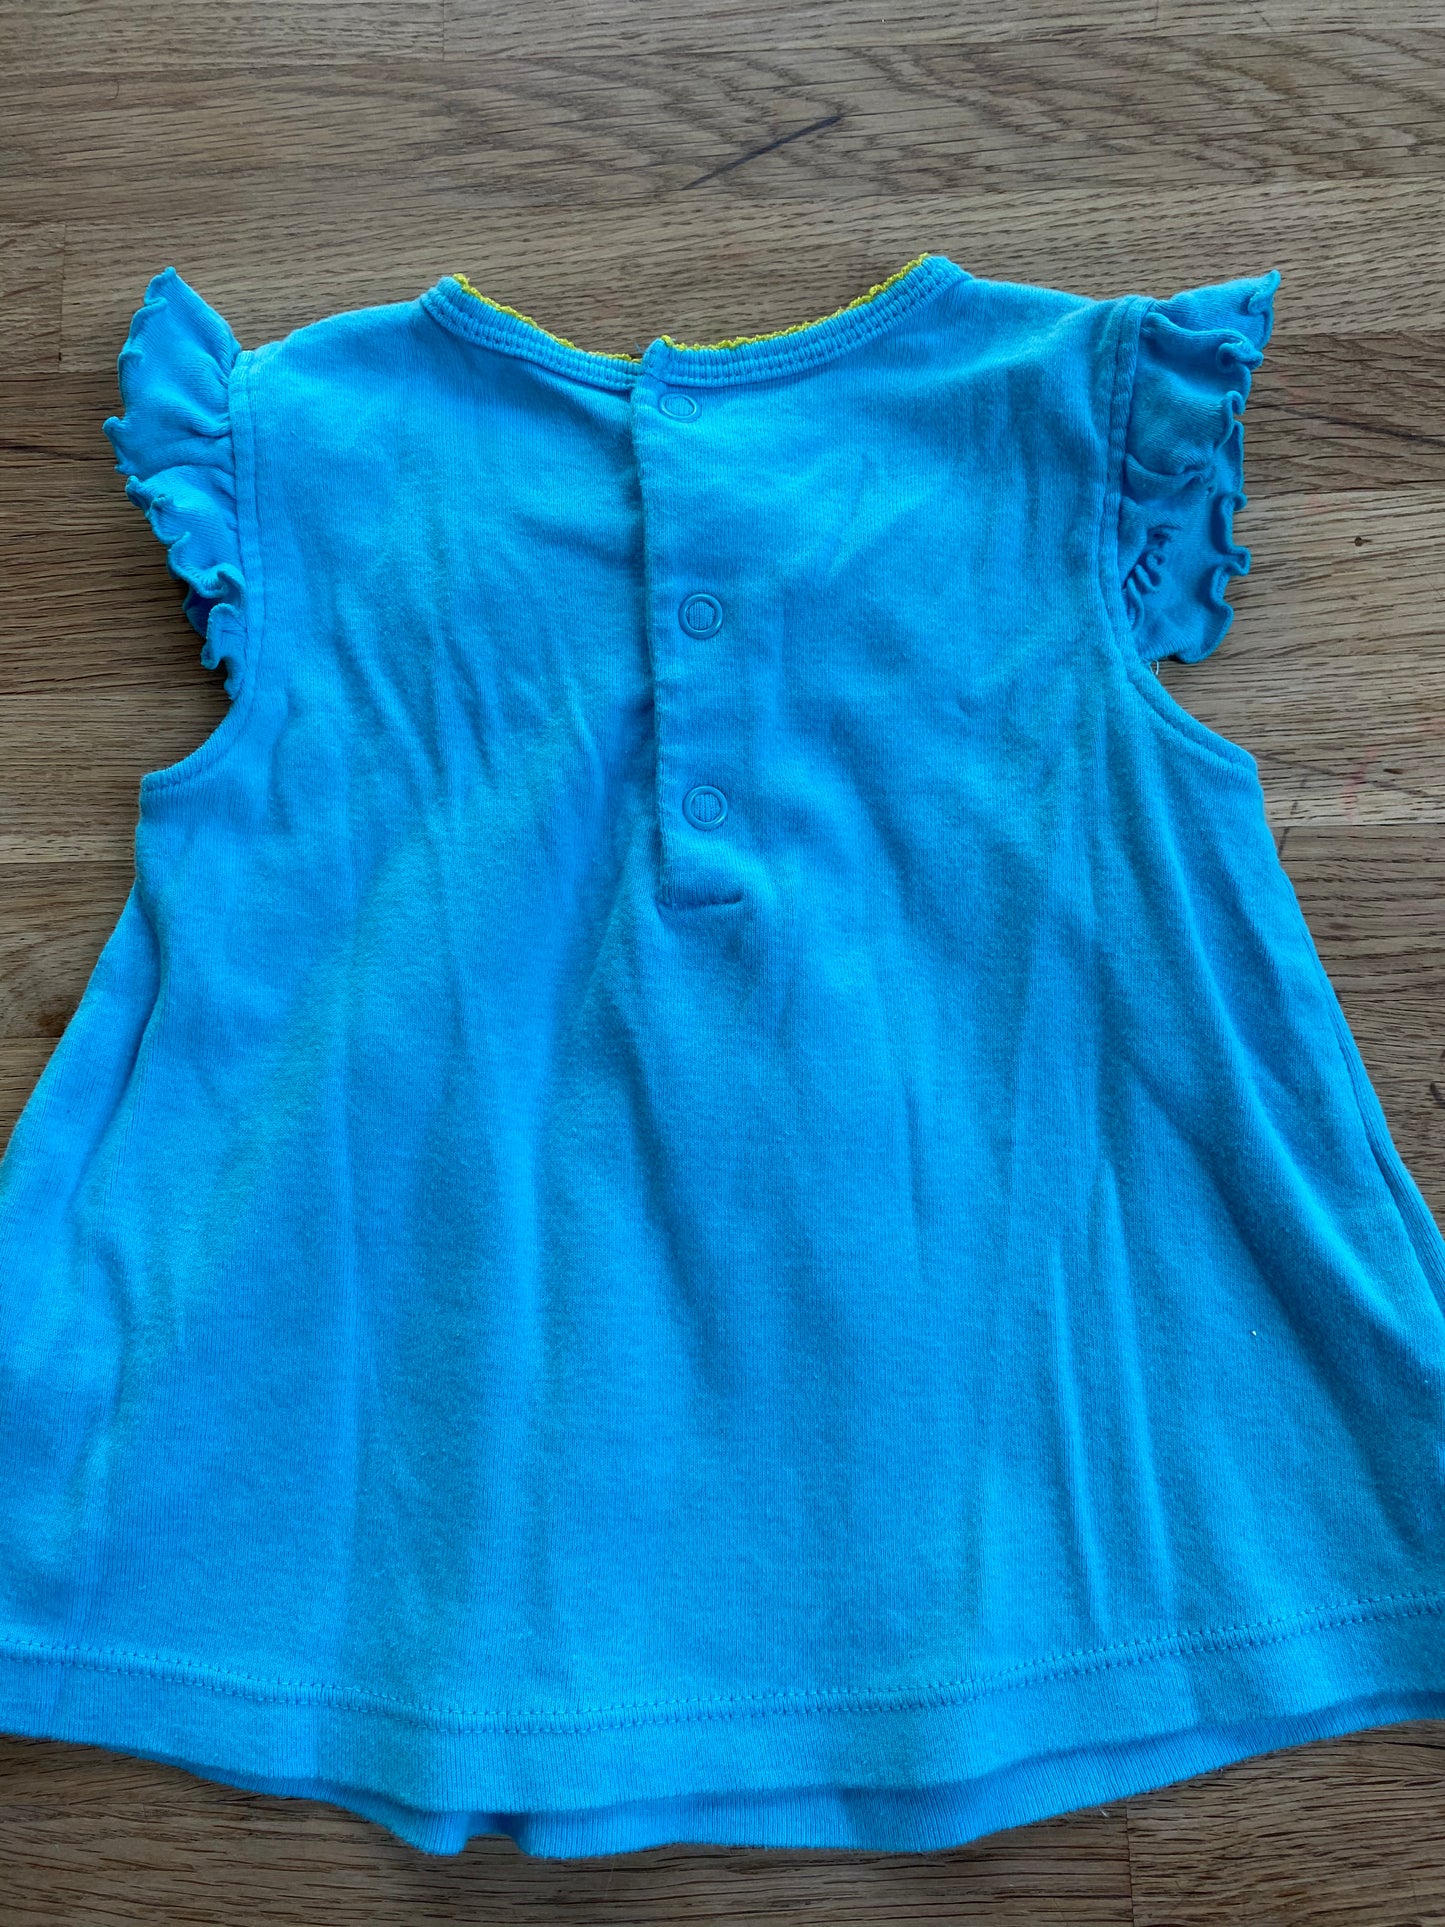 Blue Flutter Sleeves Top by Carter's 24 mo (Pre-loved)